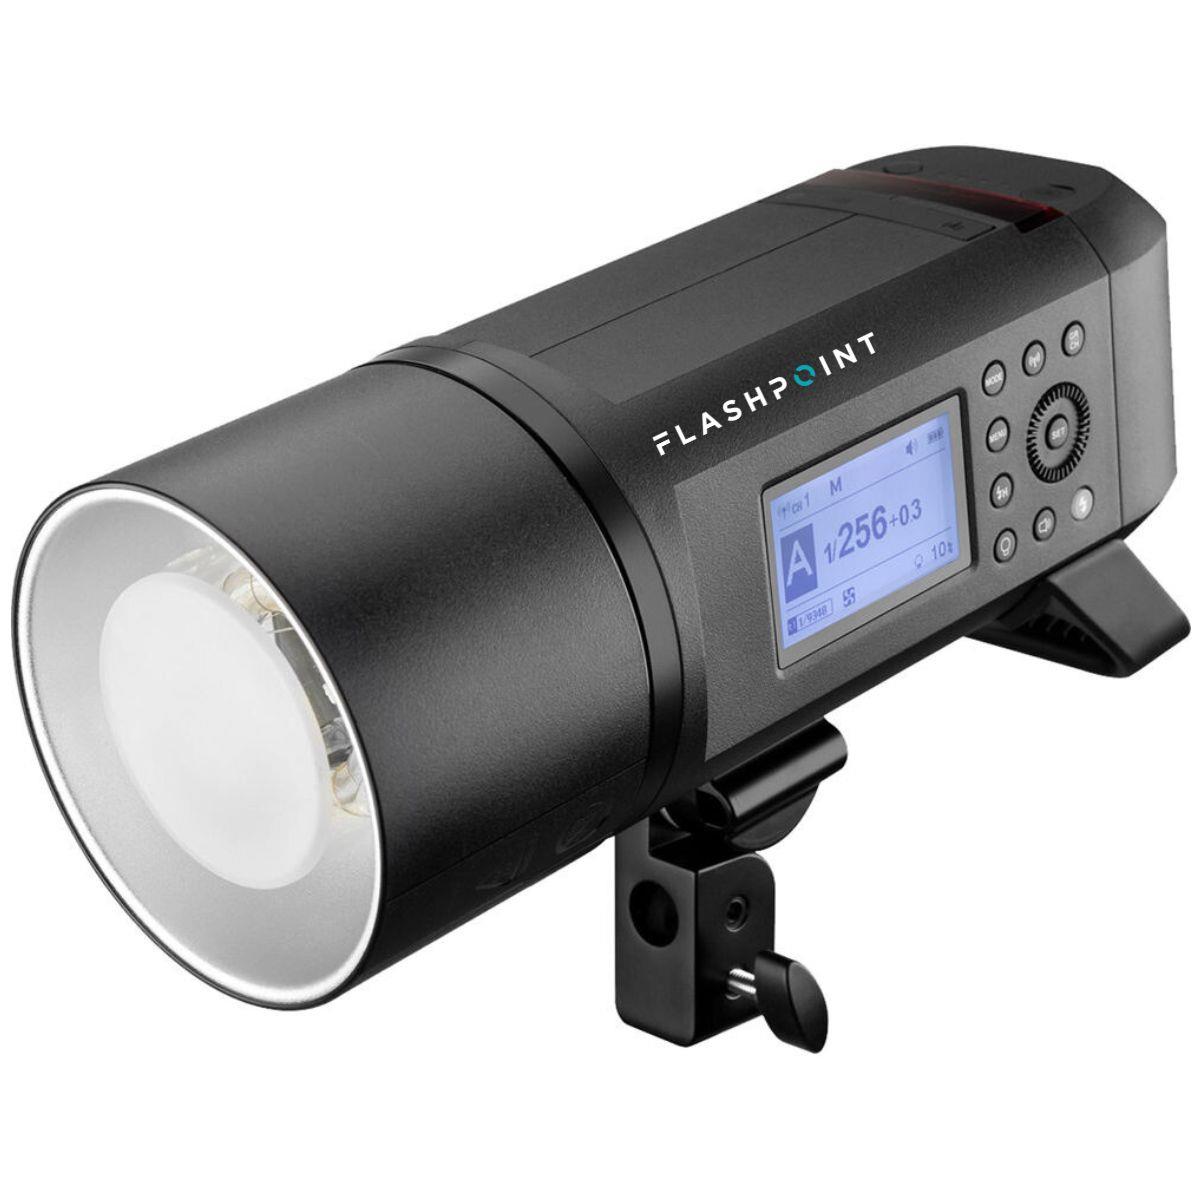 Flashpoint XPLOR 600PRO TTL R2 2.4GHz Battery-Powered Outdoor Flash & Much More $599 + free s/h